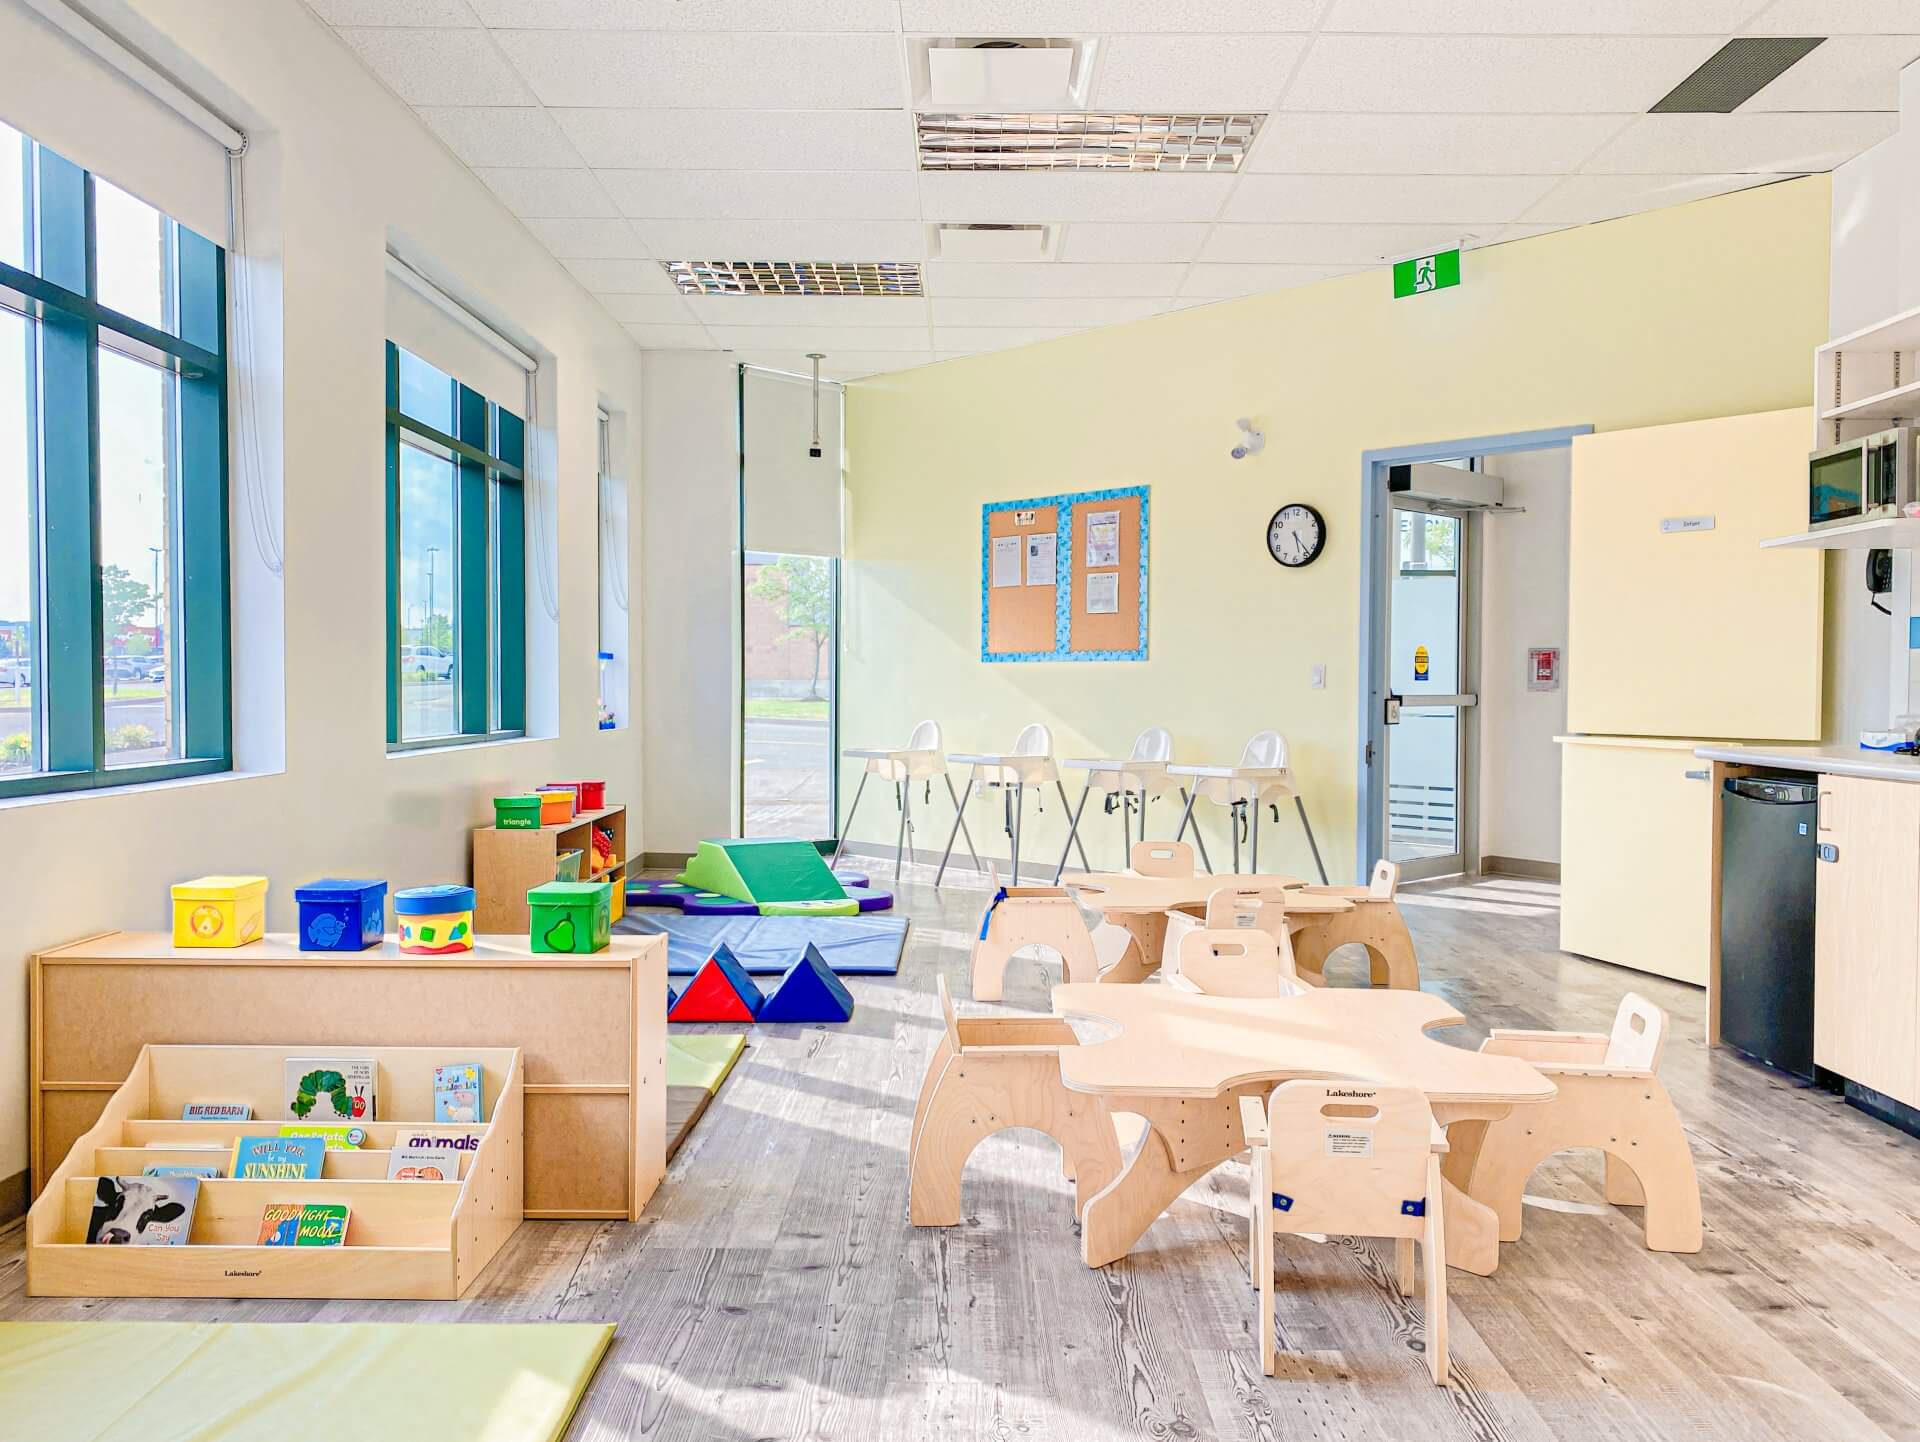 A brightly lit classroom with wooden furniture, including small tables and chairs, a bookshelf with picture books, and colorful toys. There are large windows, a clock on the wall, and a green exit sign.